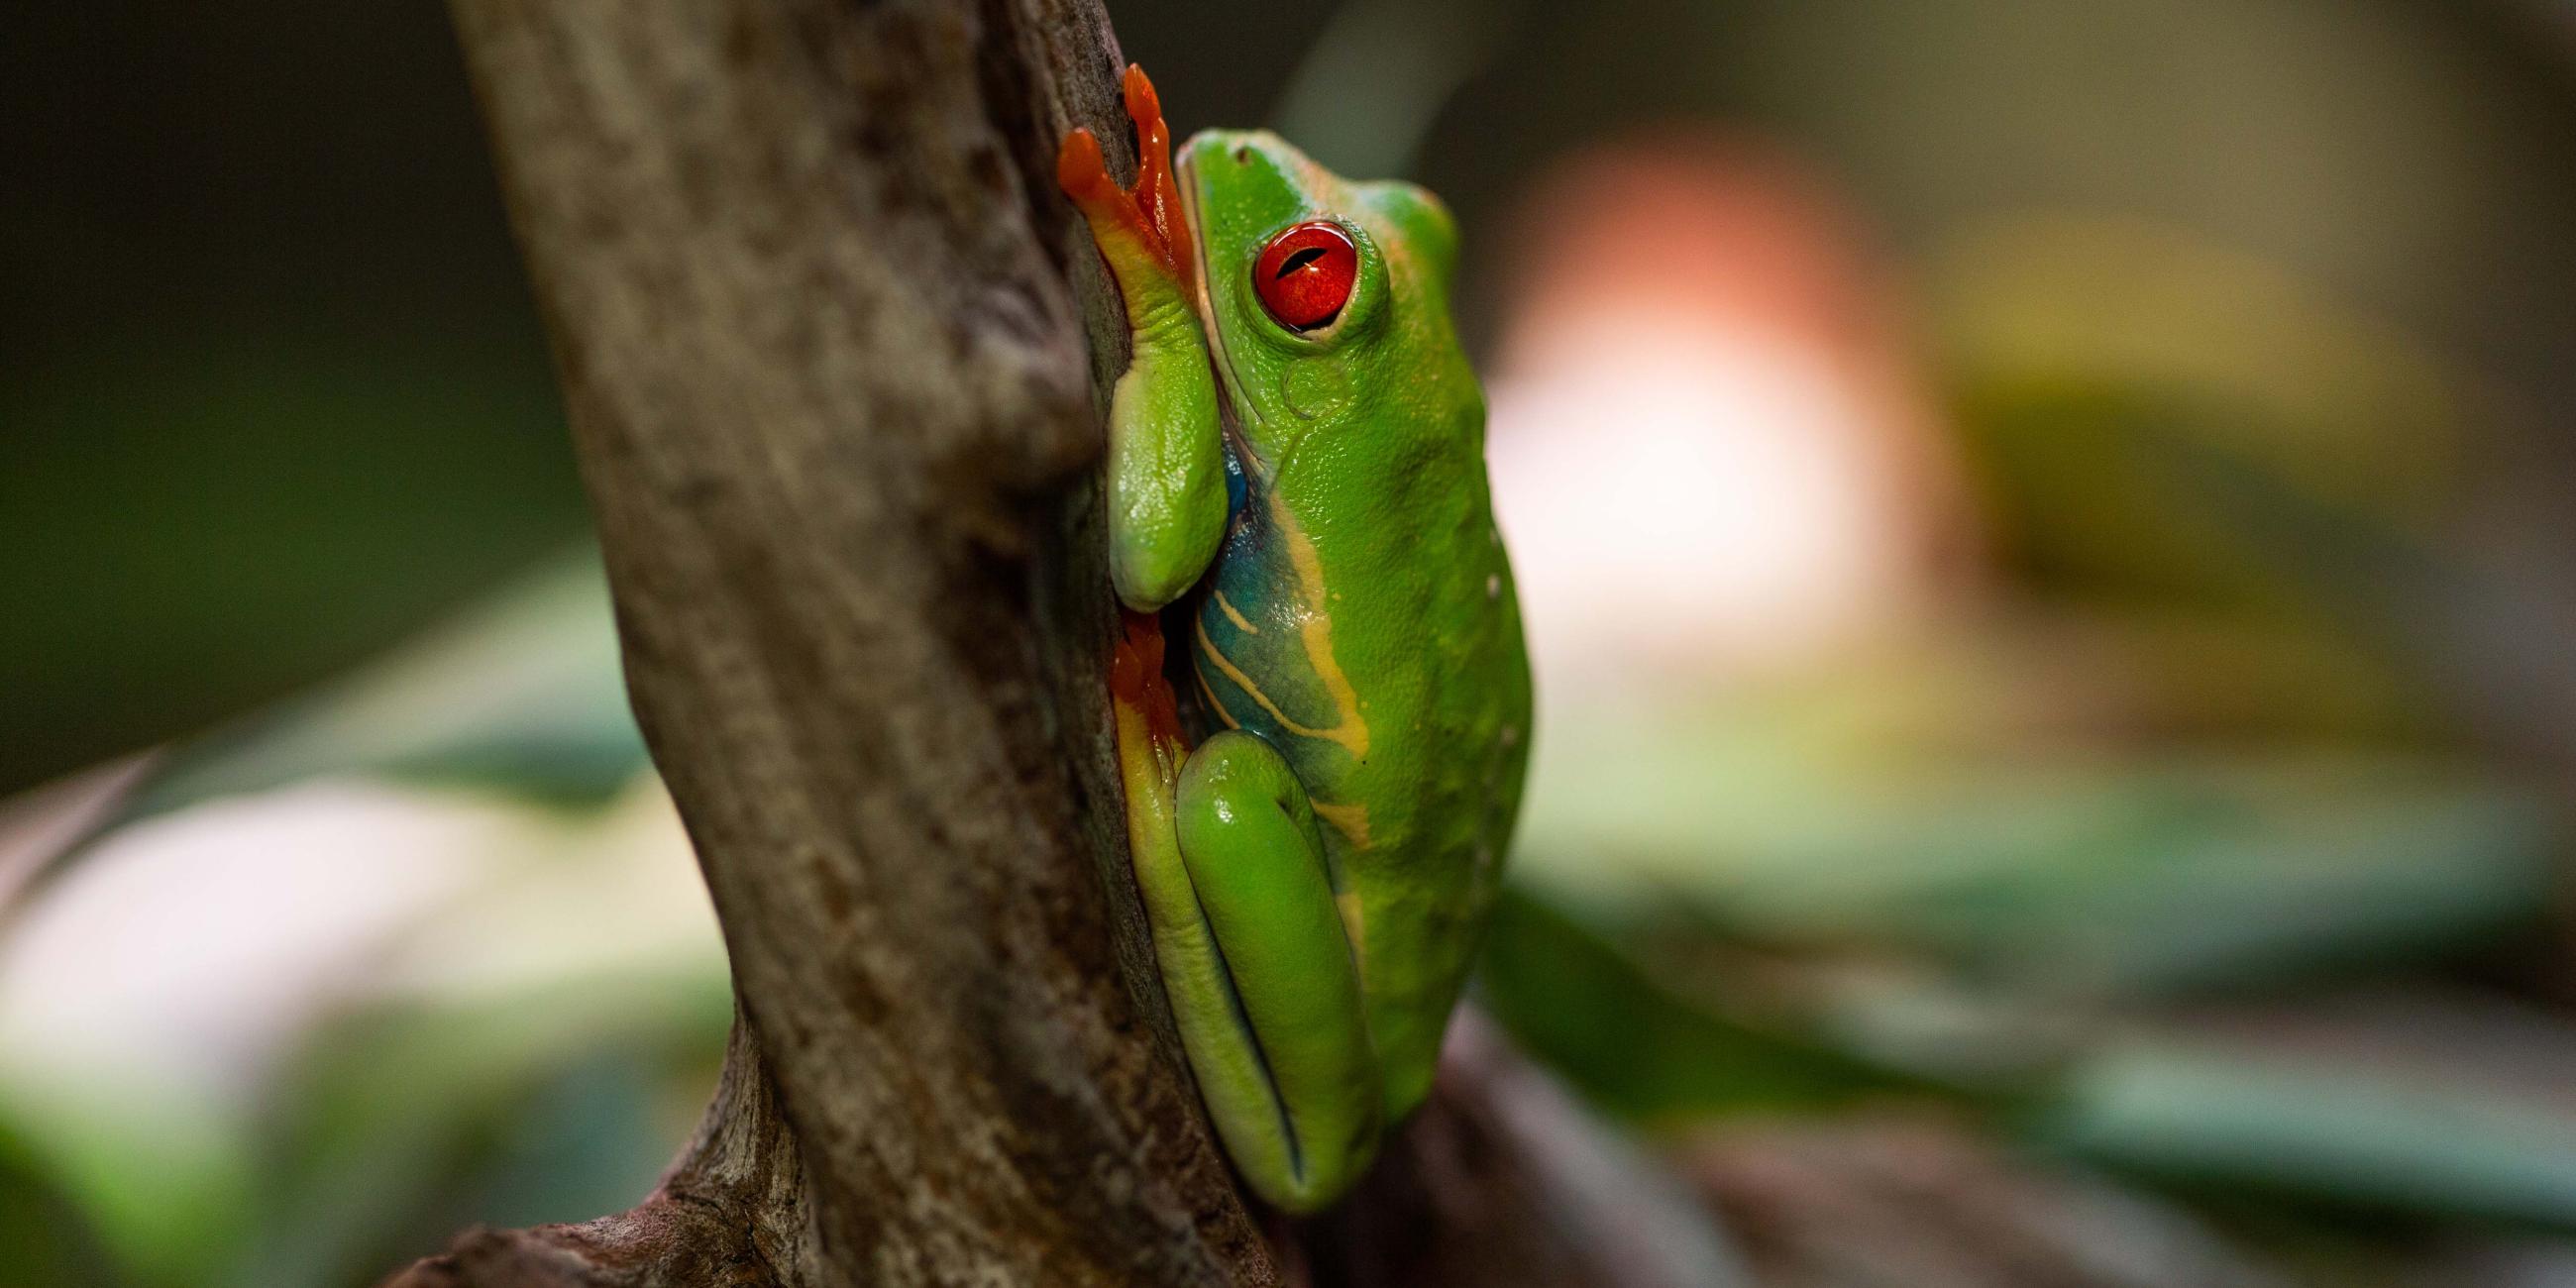 New at the Zoo: Red-Eyed Tree Frogs